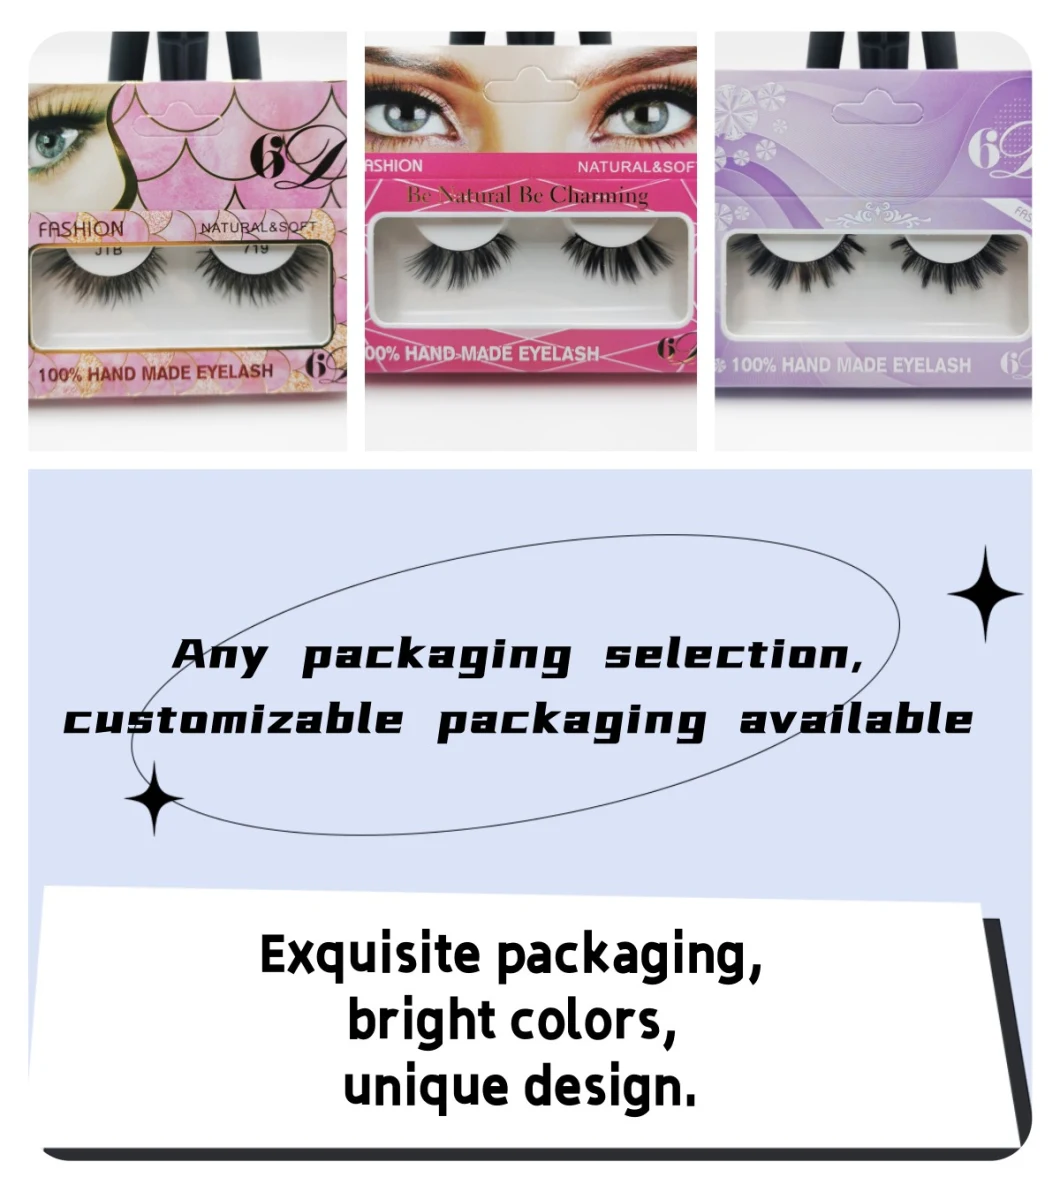 New Arrival 5 Pair Lashes Kit Set with Personalized Logo Silk and Mink Magnetic Eyelashes